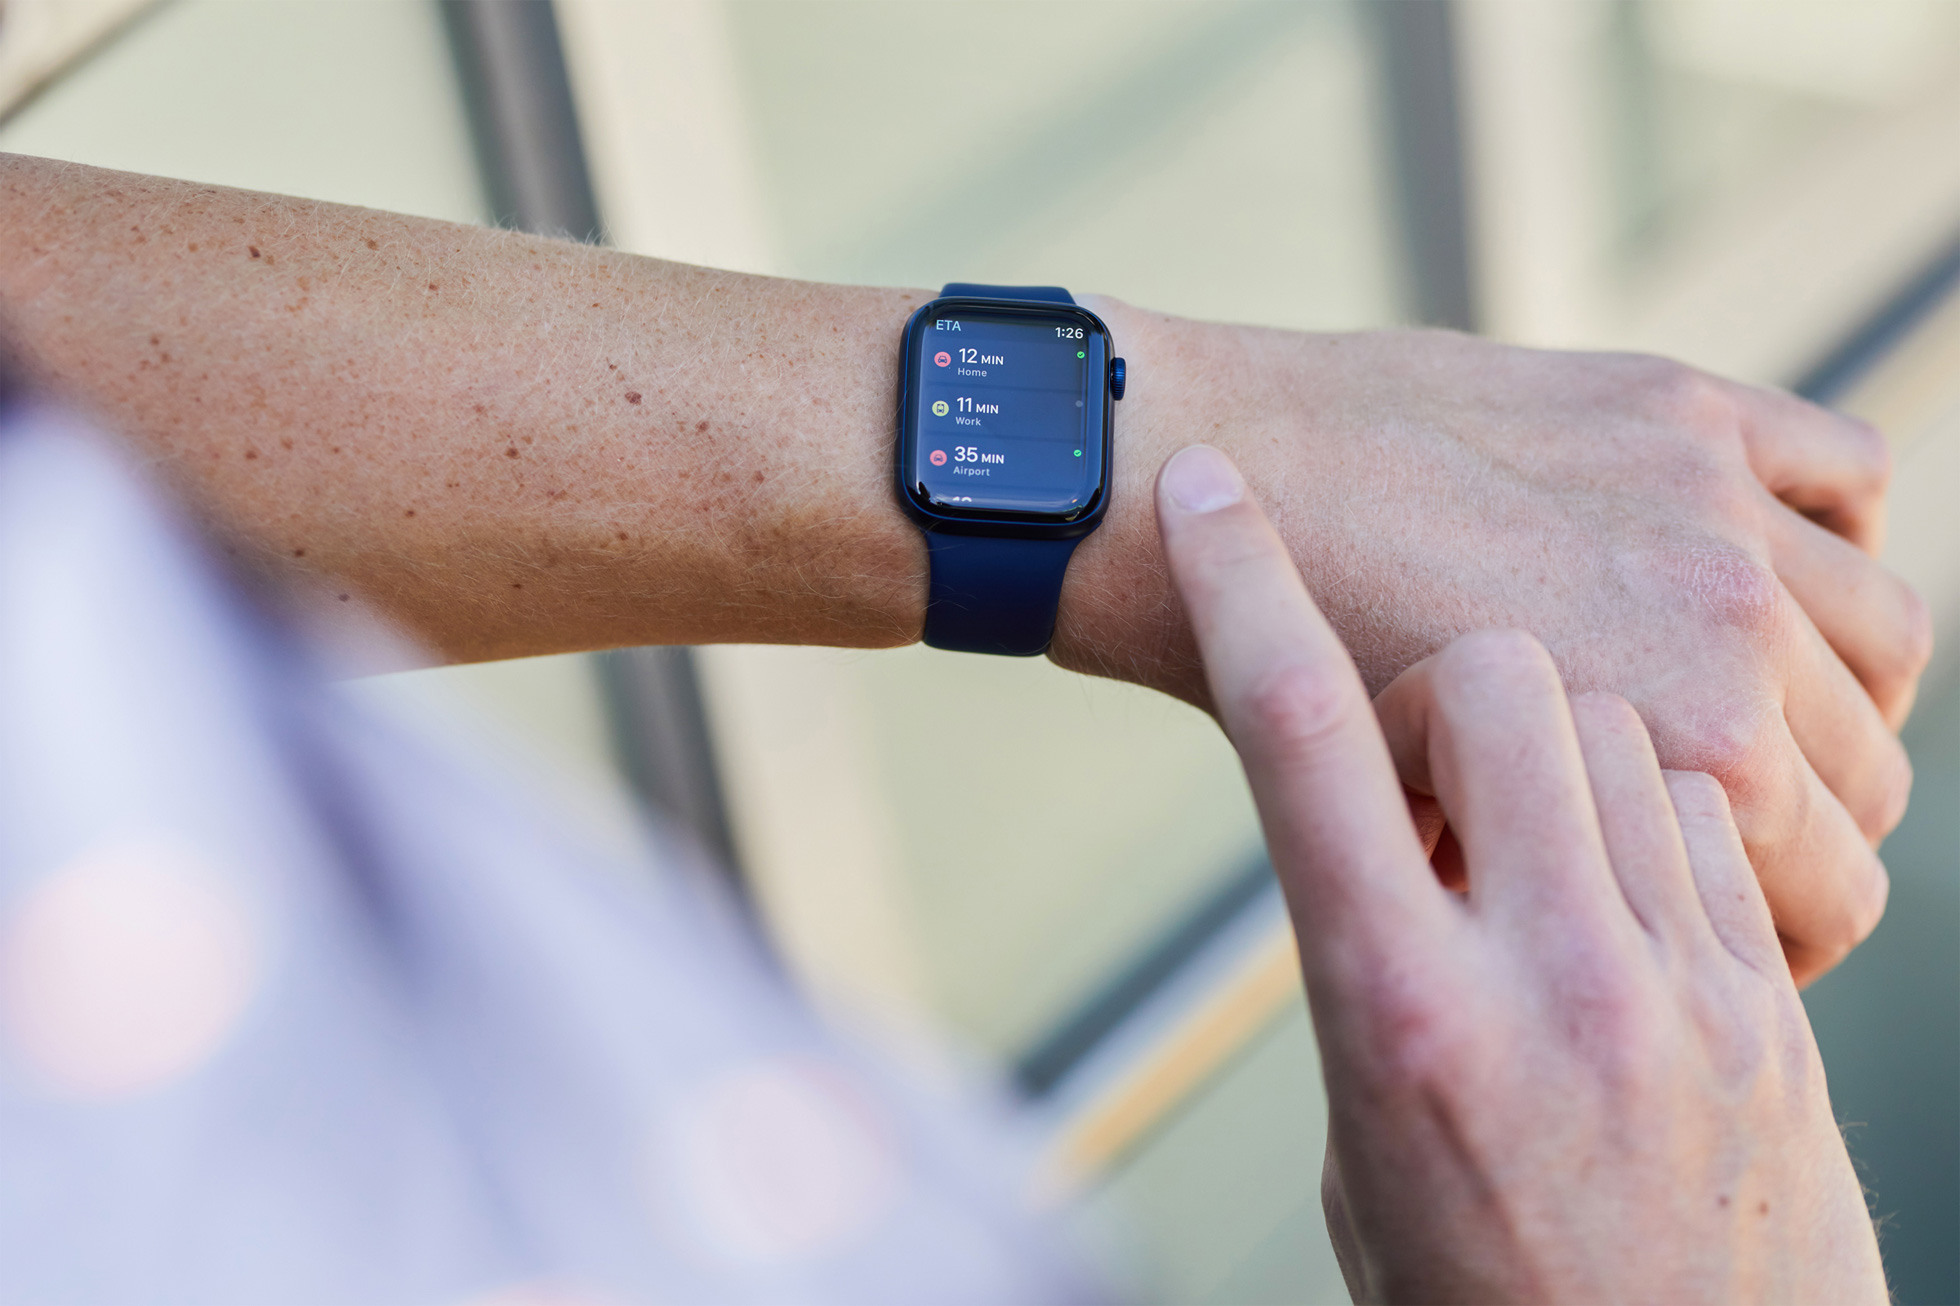 ETA calculates and presents travel time at a glance, keeping users up to date on their estimated time of arrival on Apple Watch and iPhone.